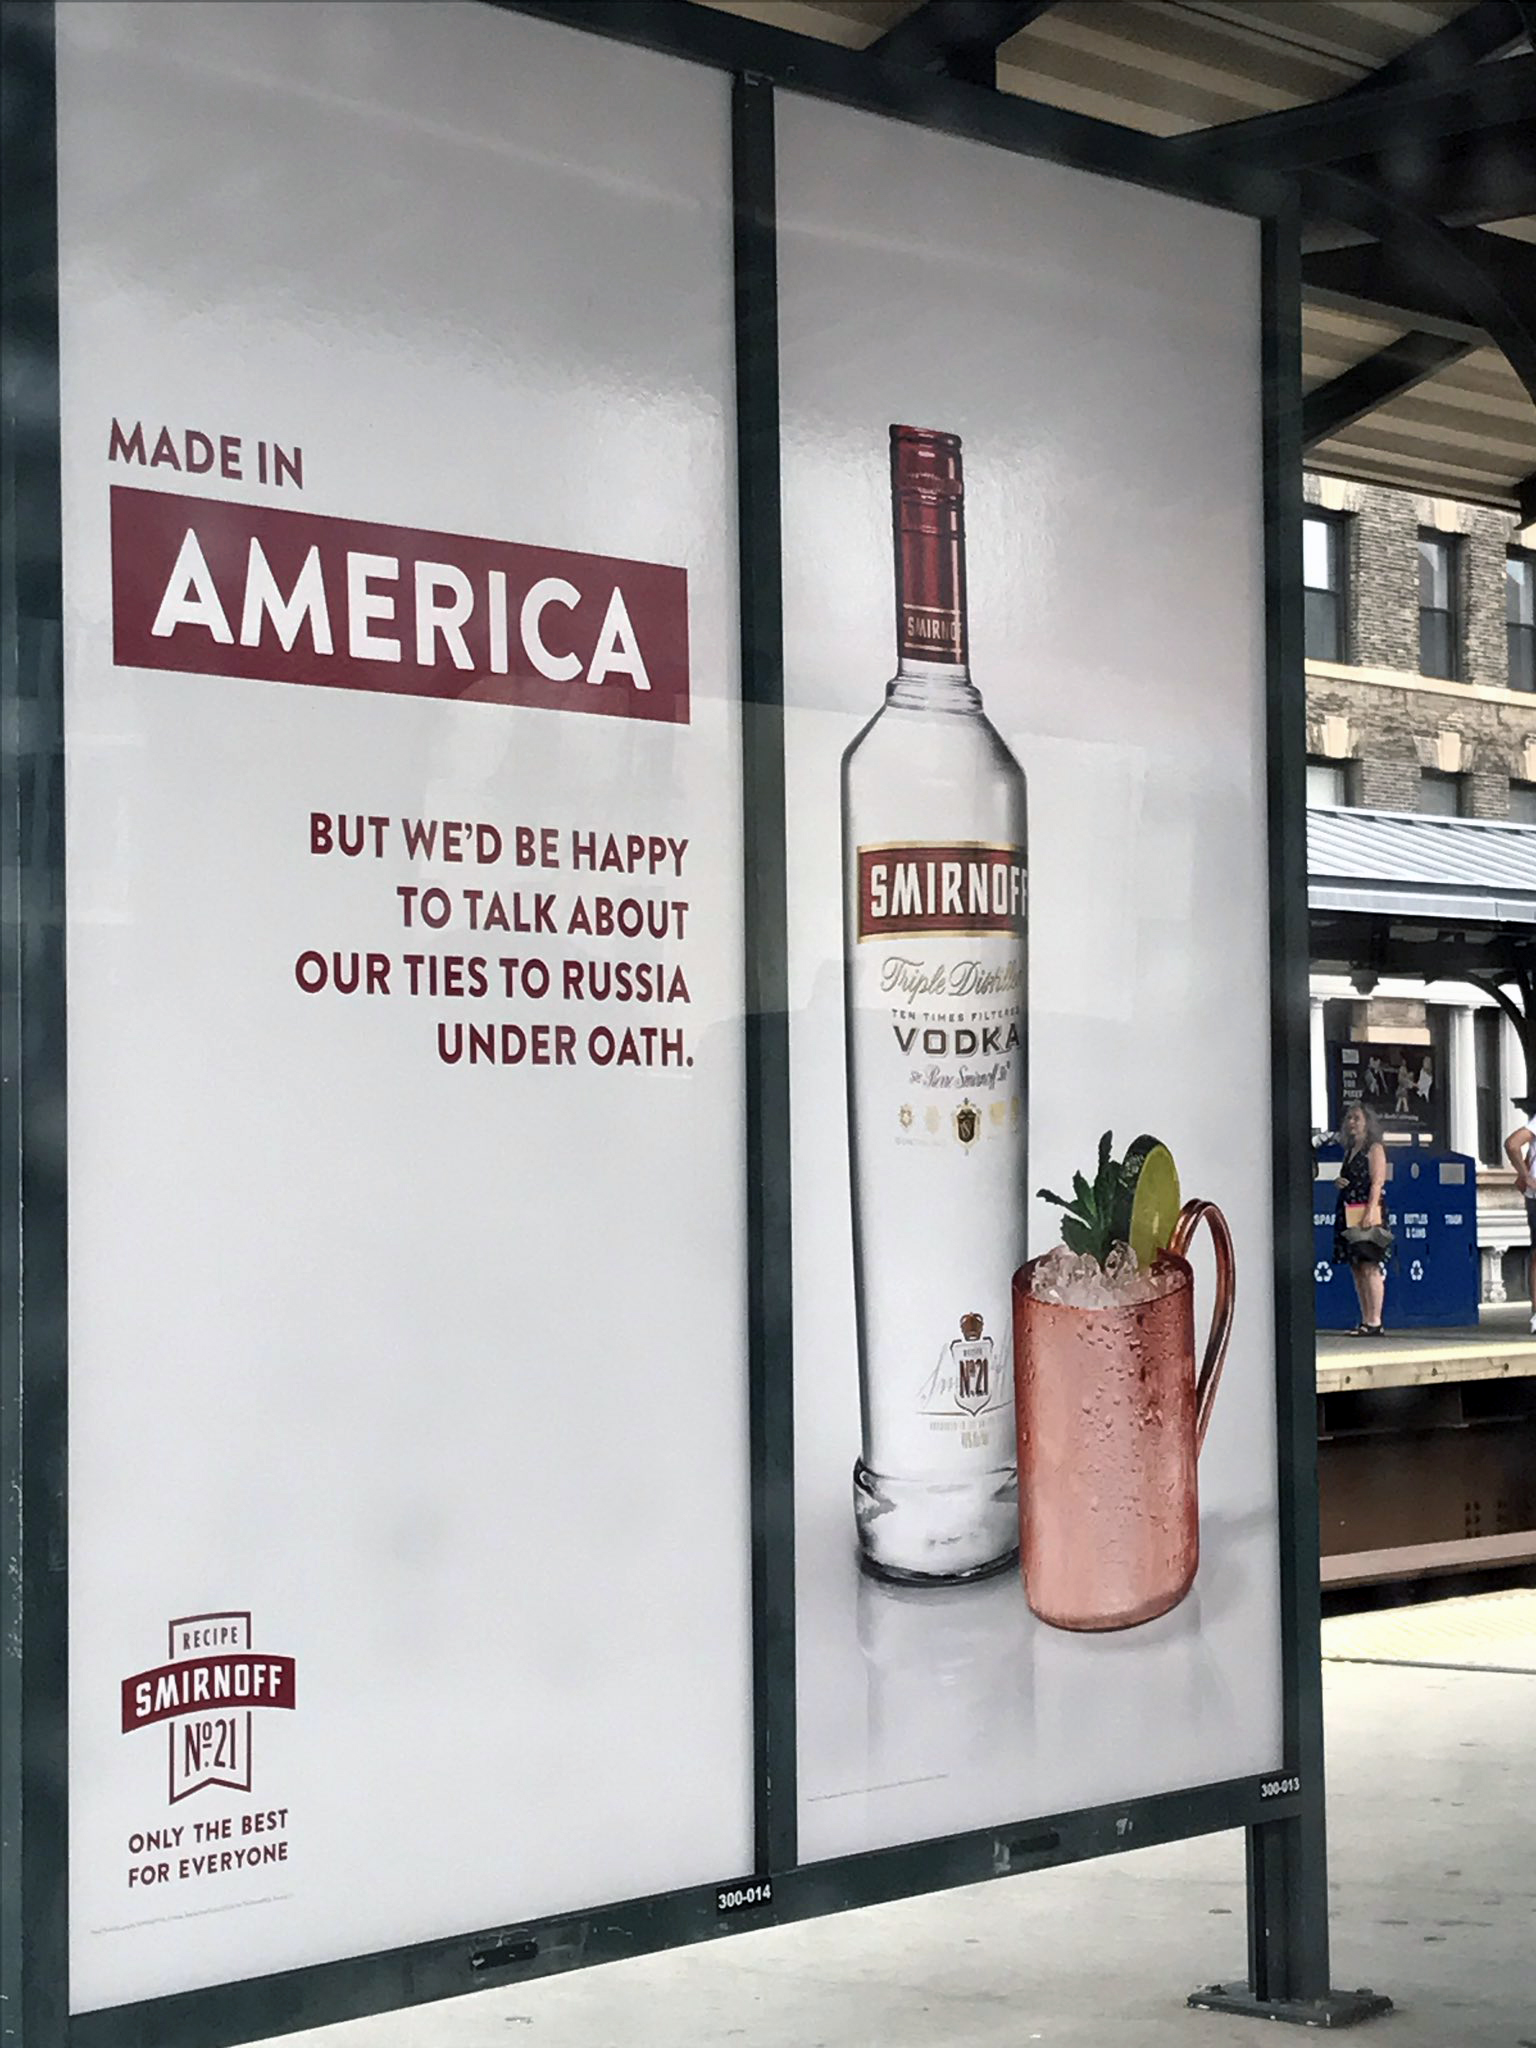 source:smirnoff.comSmirnoff took a potentially polarizing political angle in this billboard advertisement.